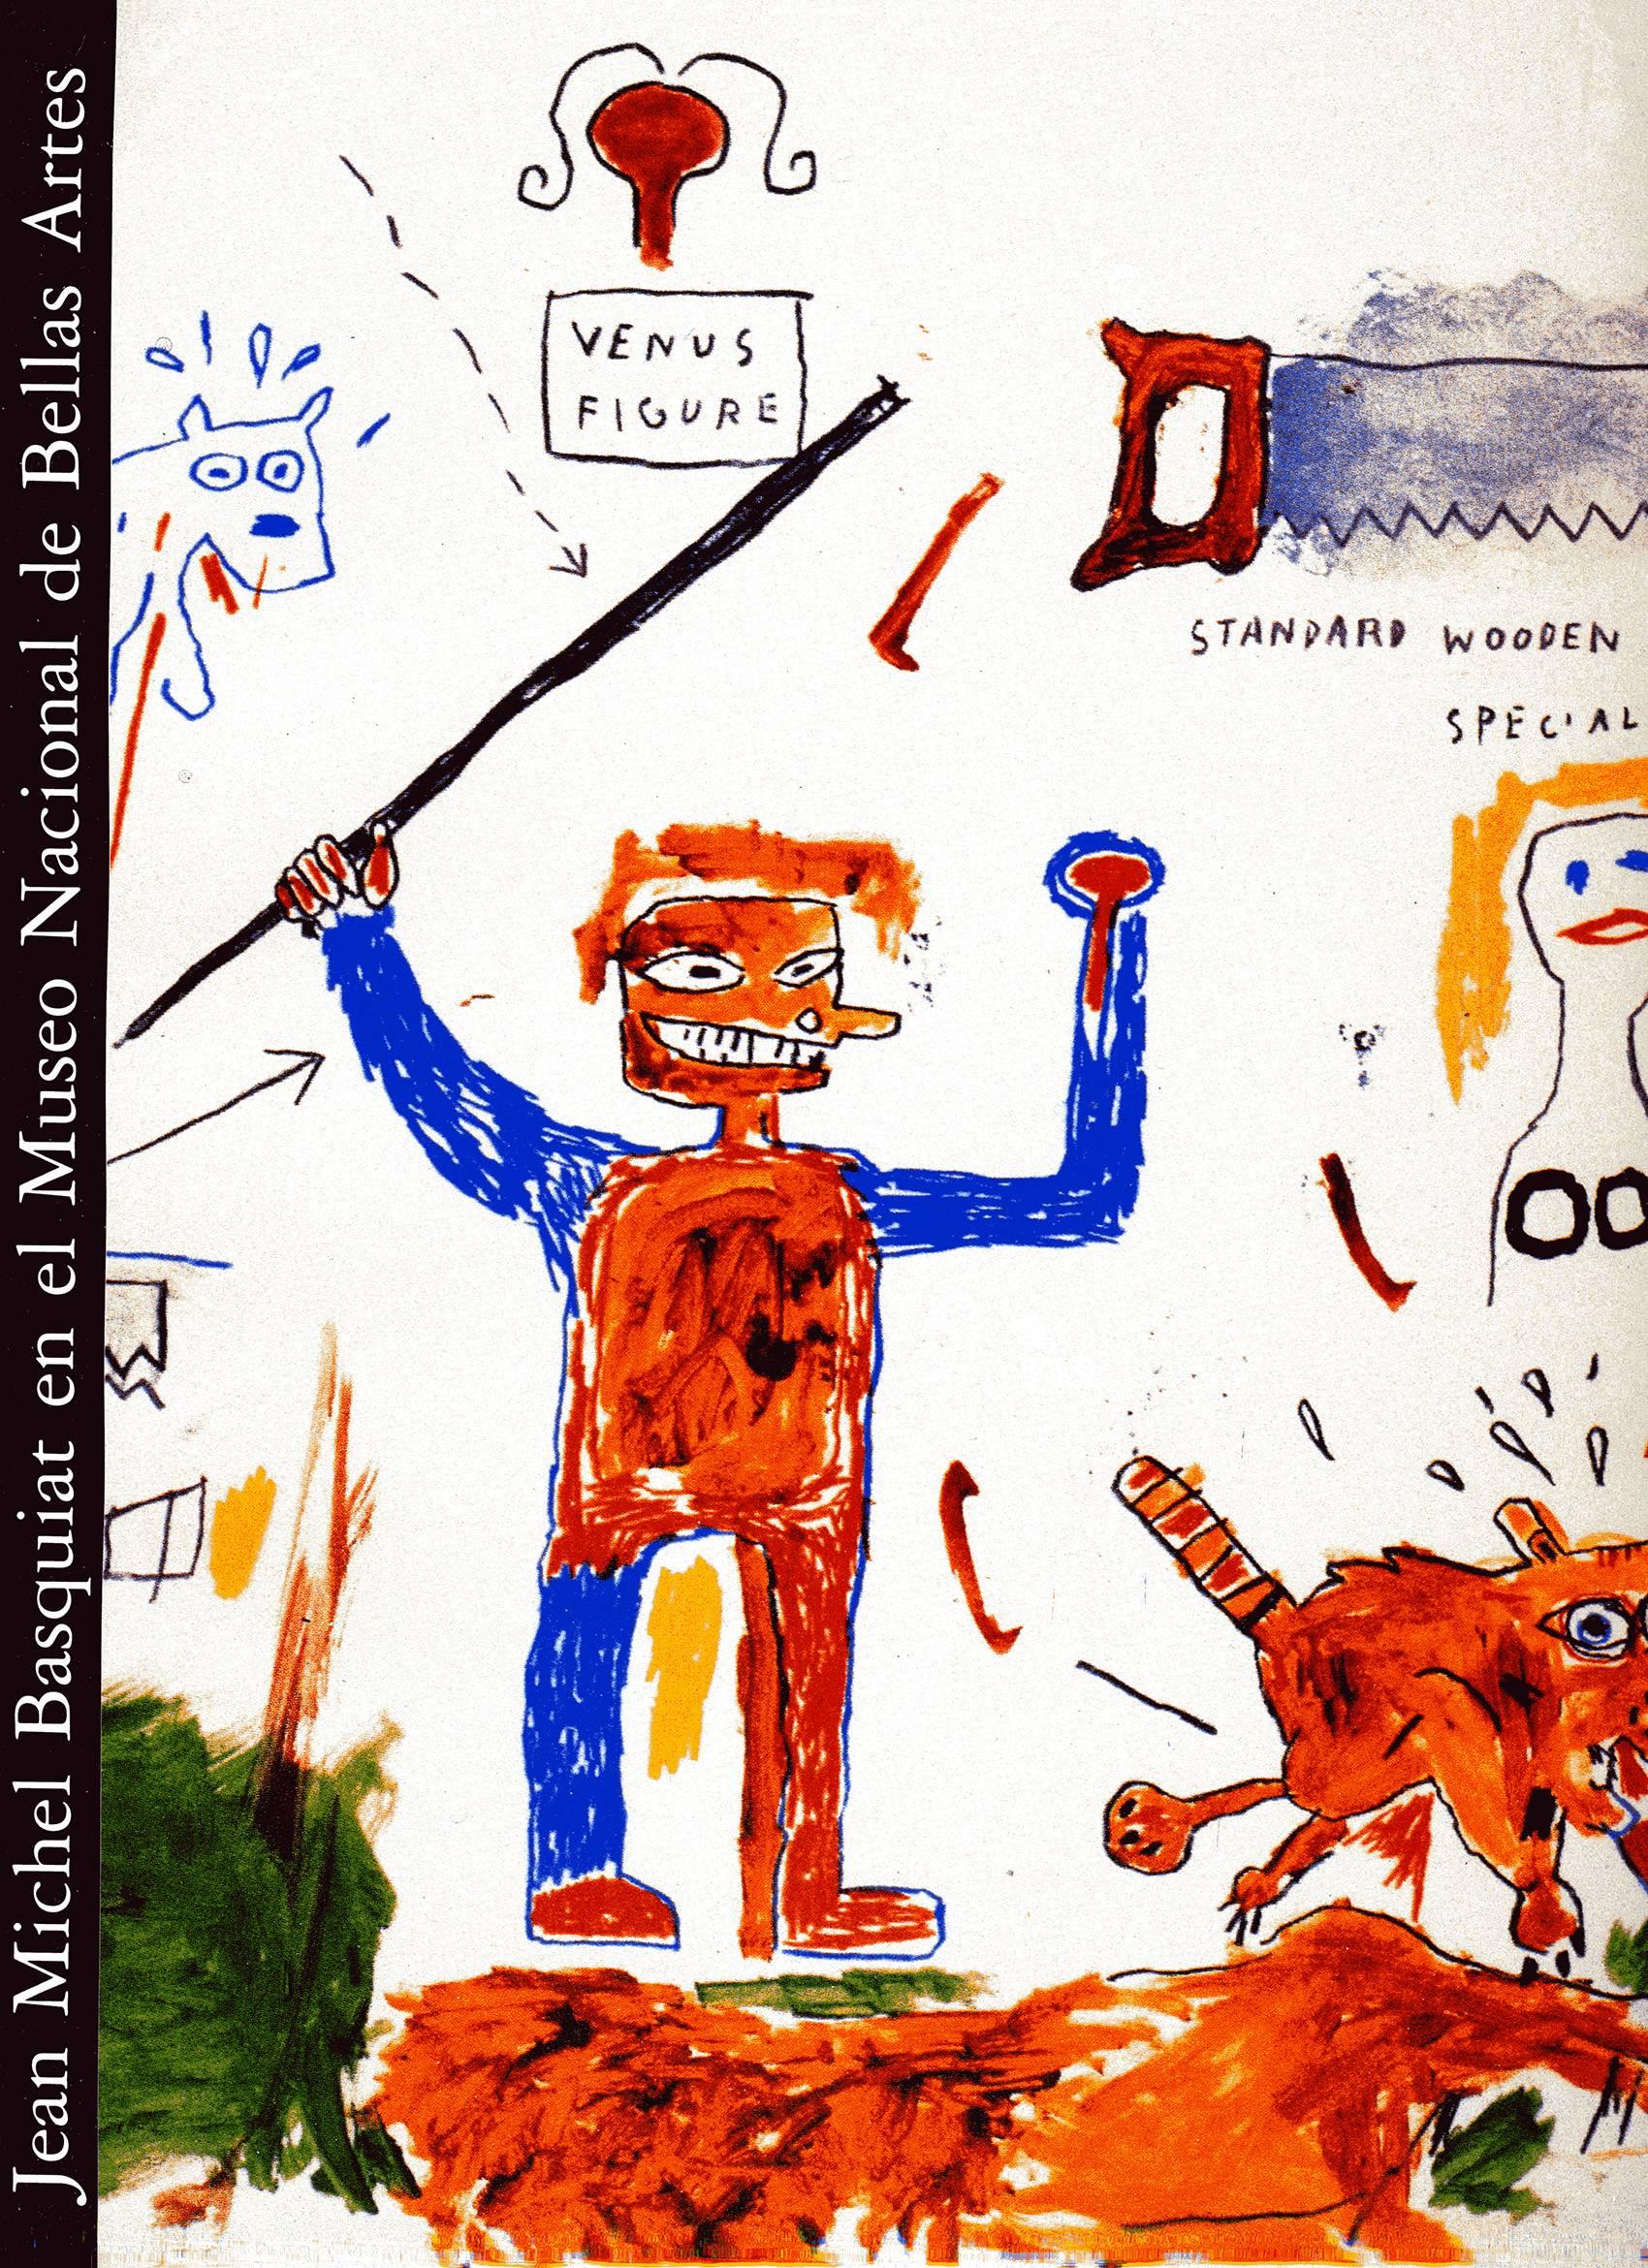 Basquiat Works on Paper Catalog, Buenos Aires - Art by after Jean-Michel Basquiat